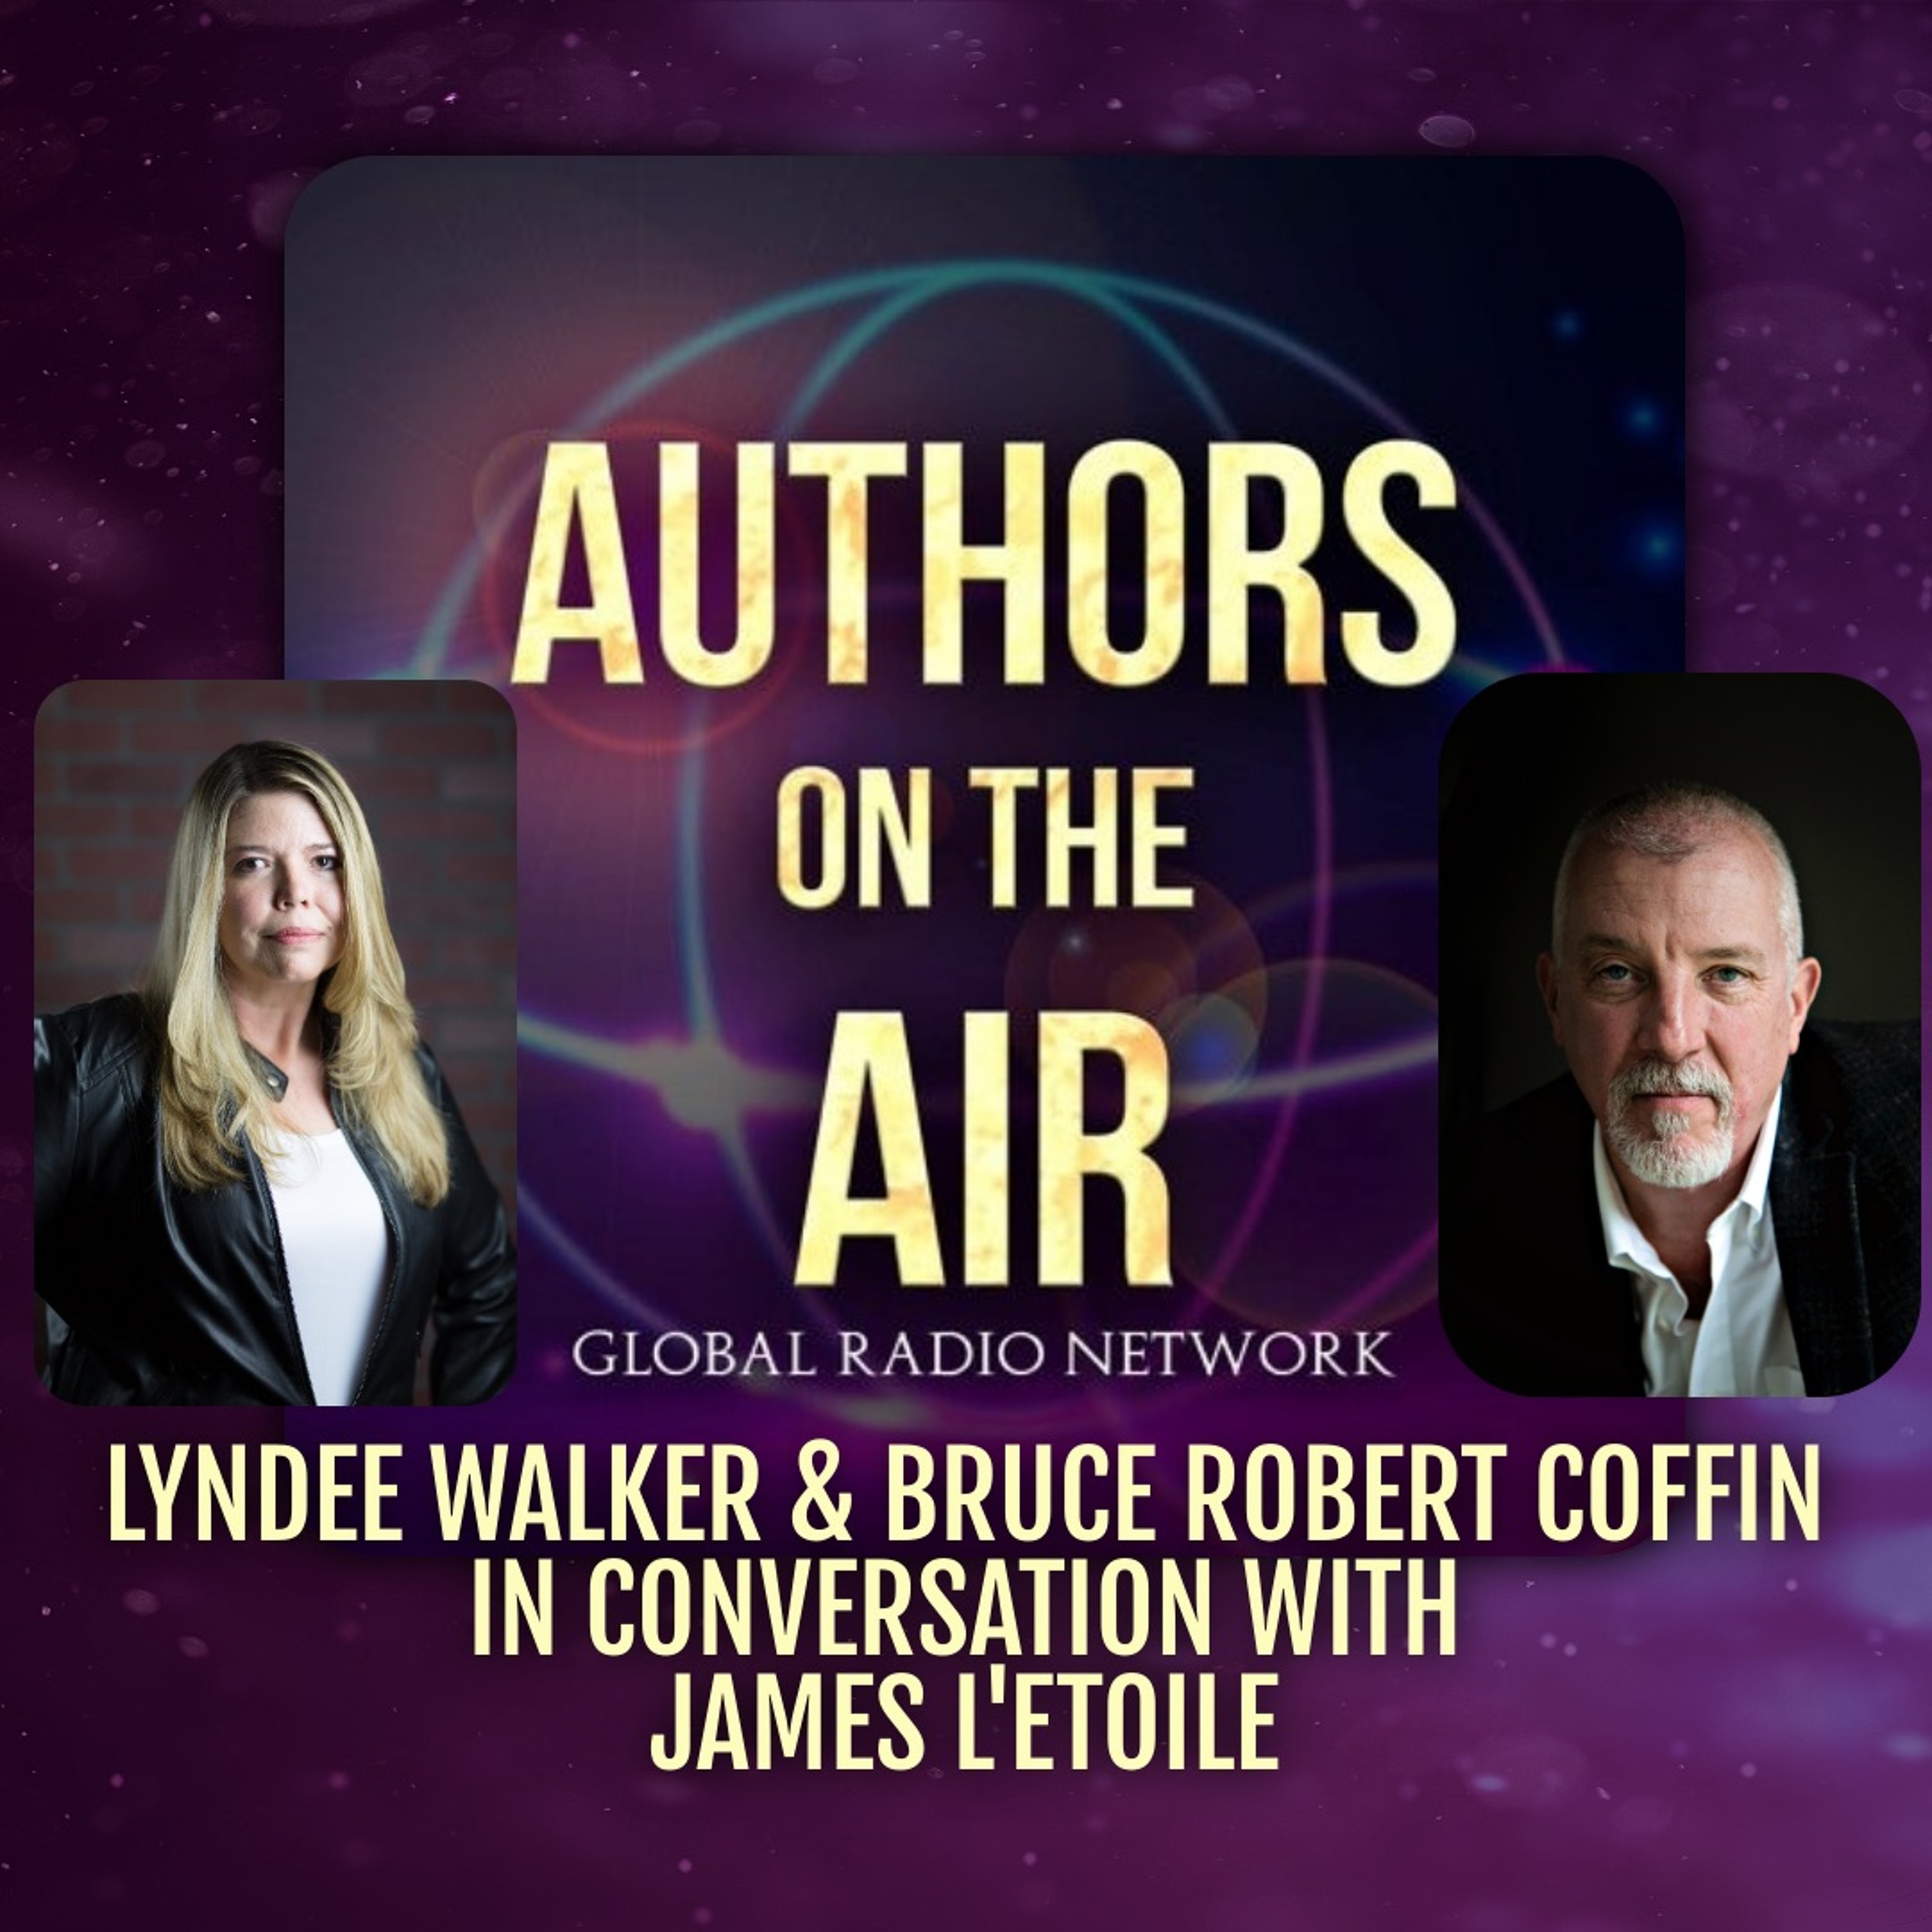 LynDee Walker & Bruce Robert Coffin - The General's Gold  Authors on the Air